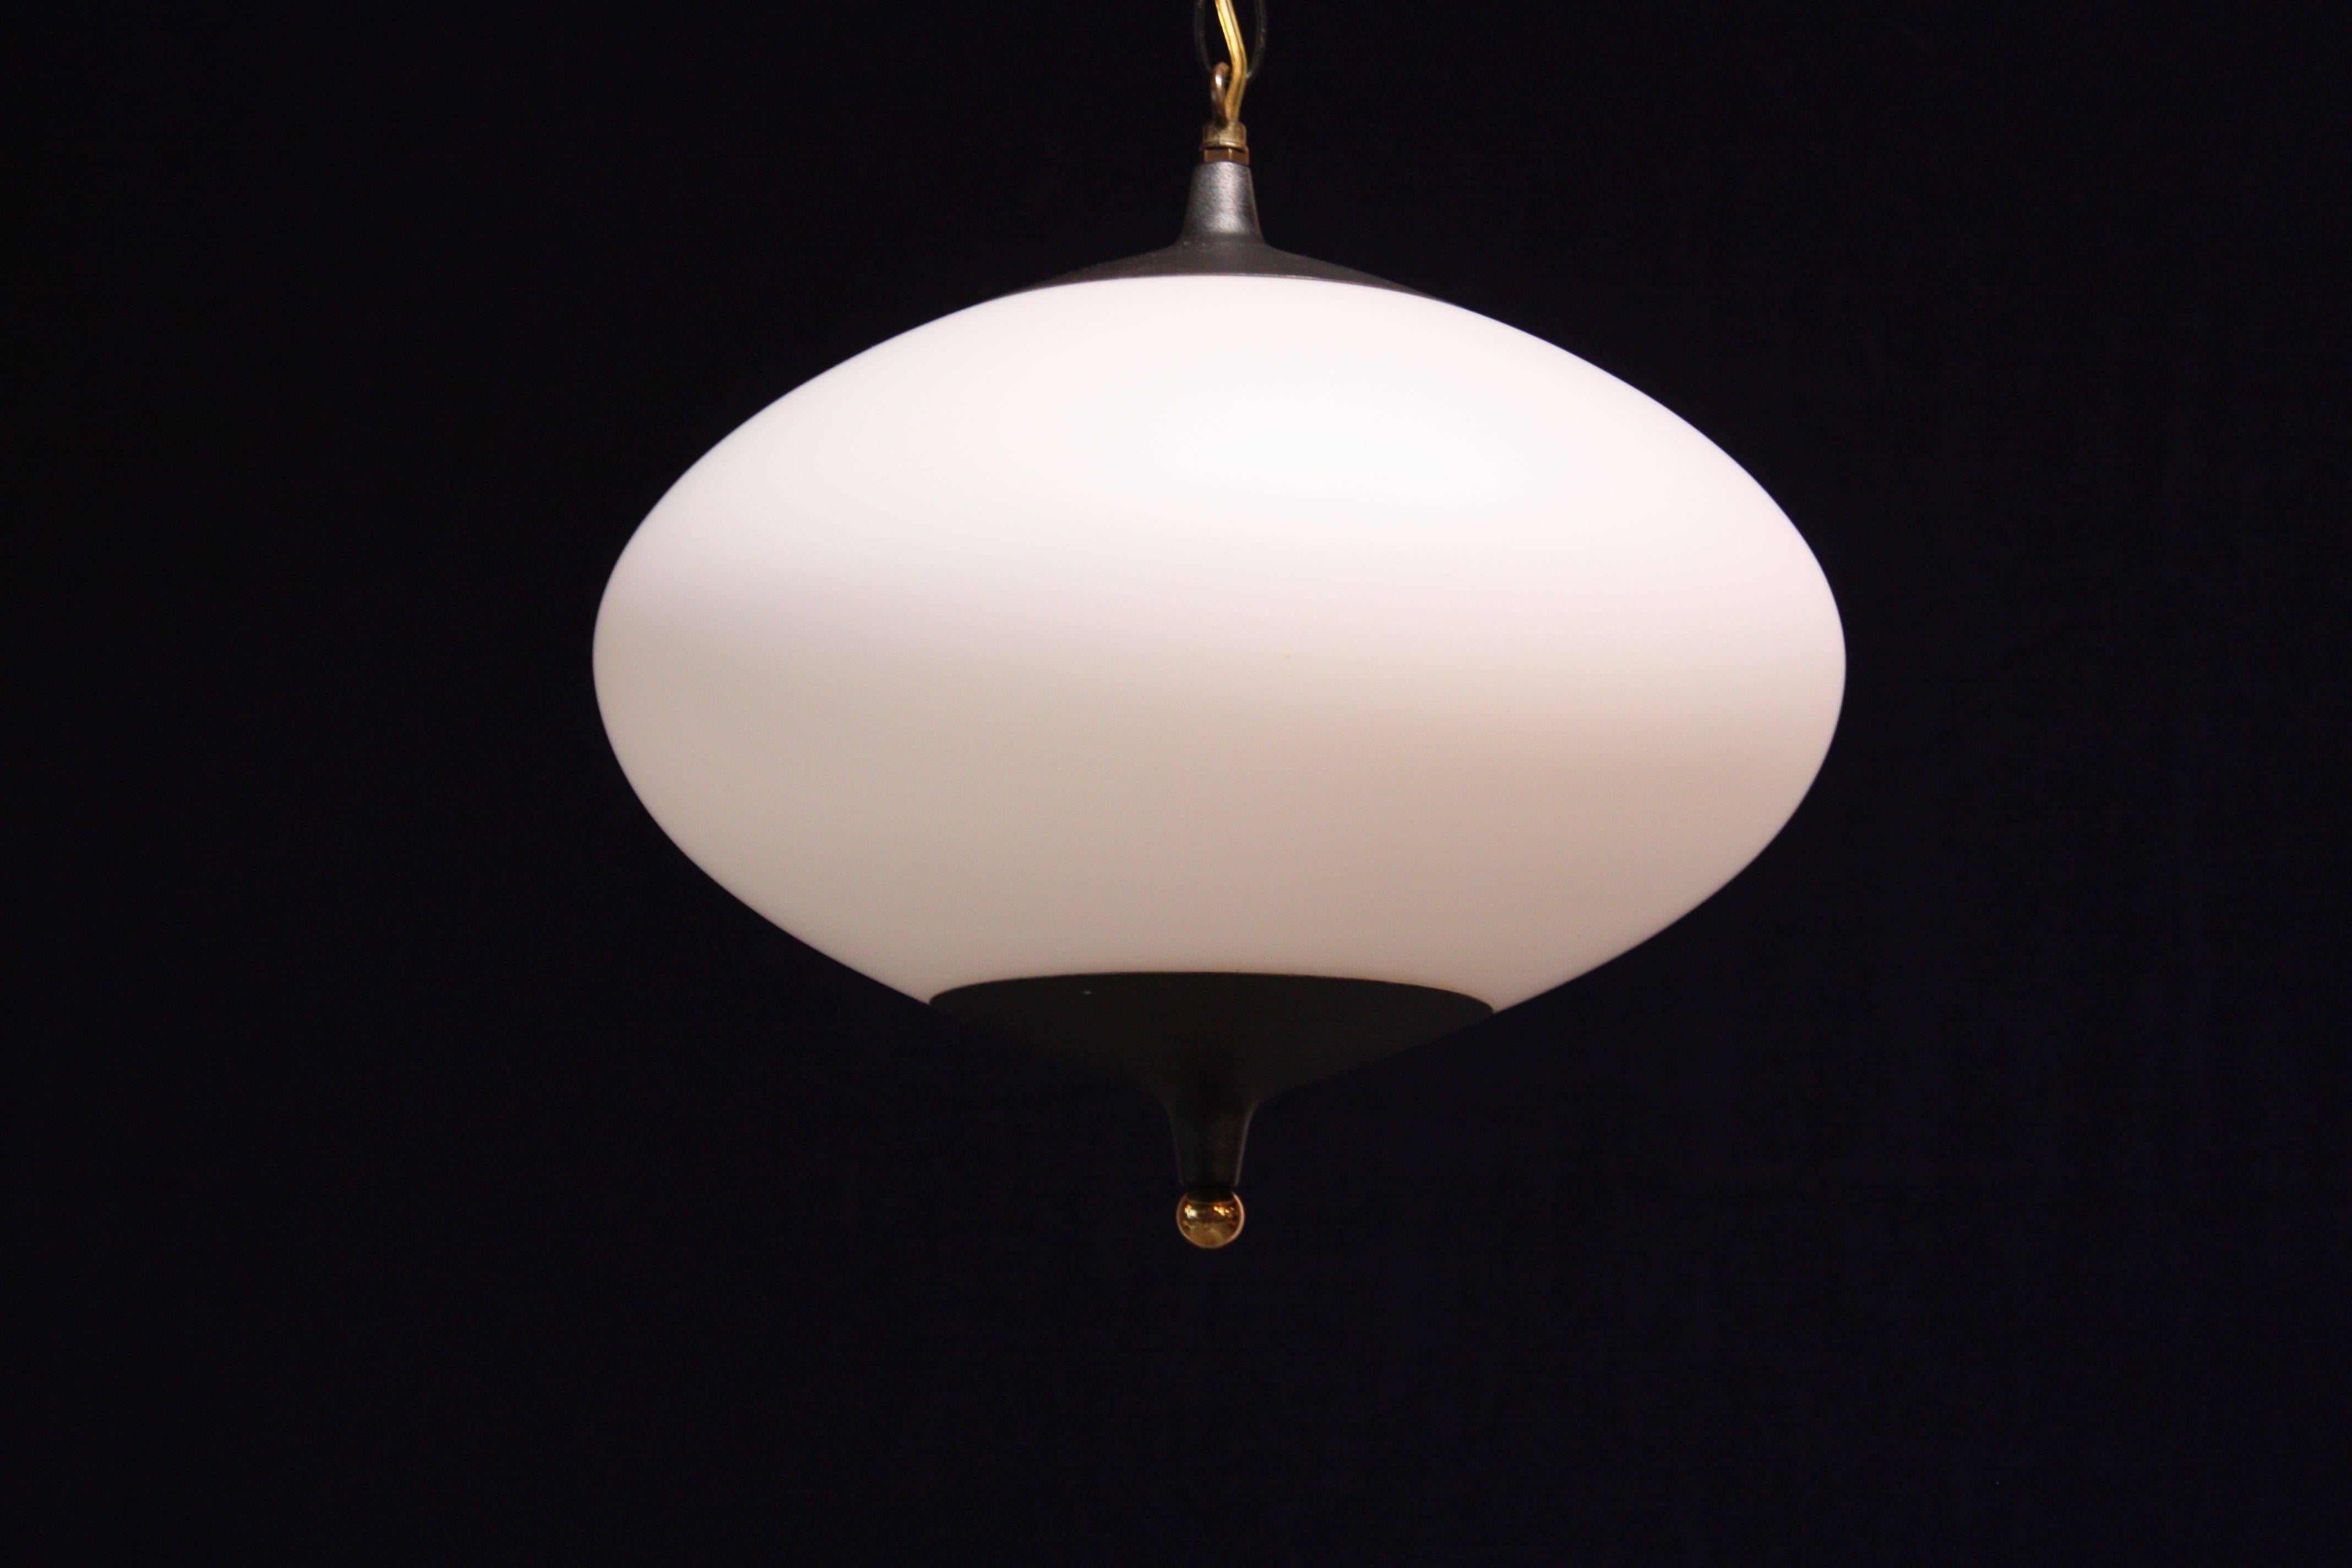 1950s American modern pendant in opal glass with black metal accents and bottom brass finial. The translucent, frosted glass allows for uniform distribution of the light. A powerful light source for a modestly sized fixture.